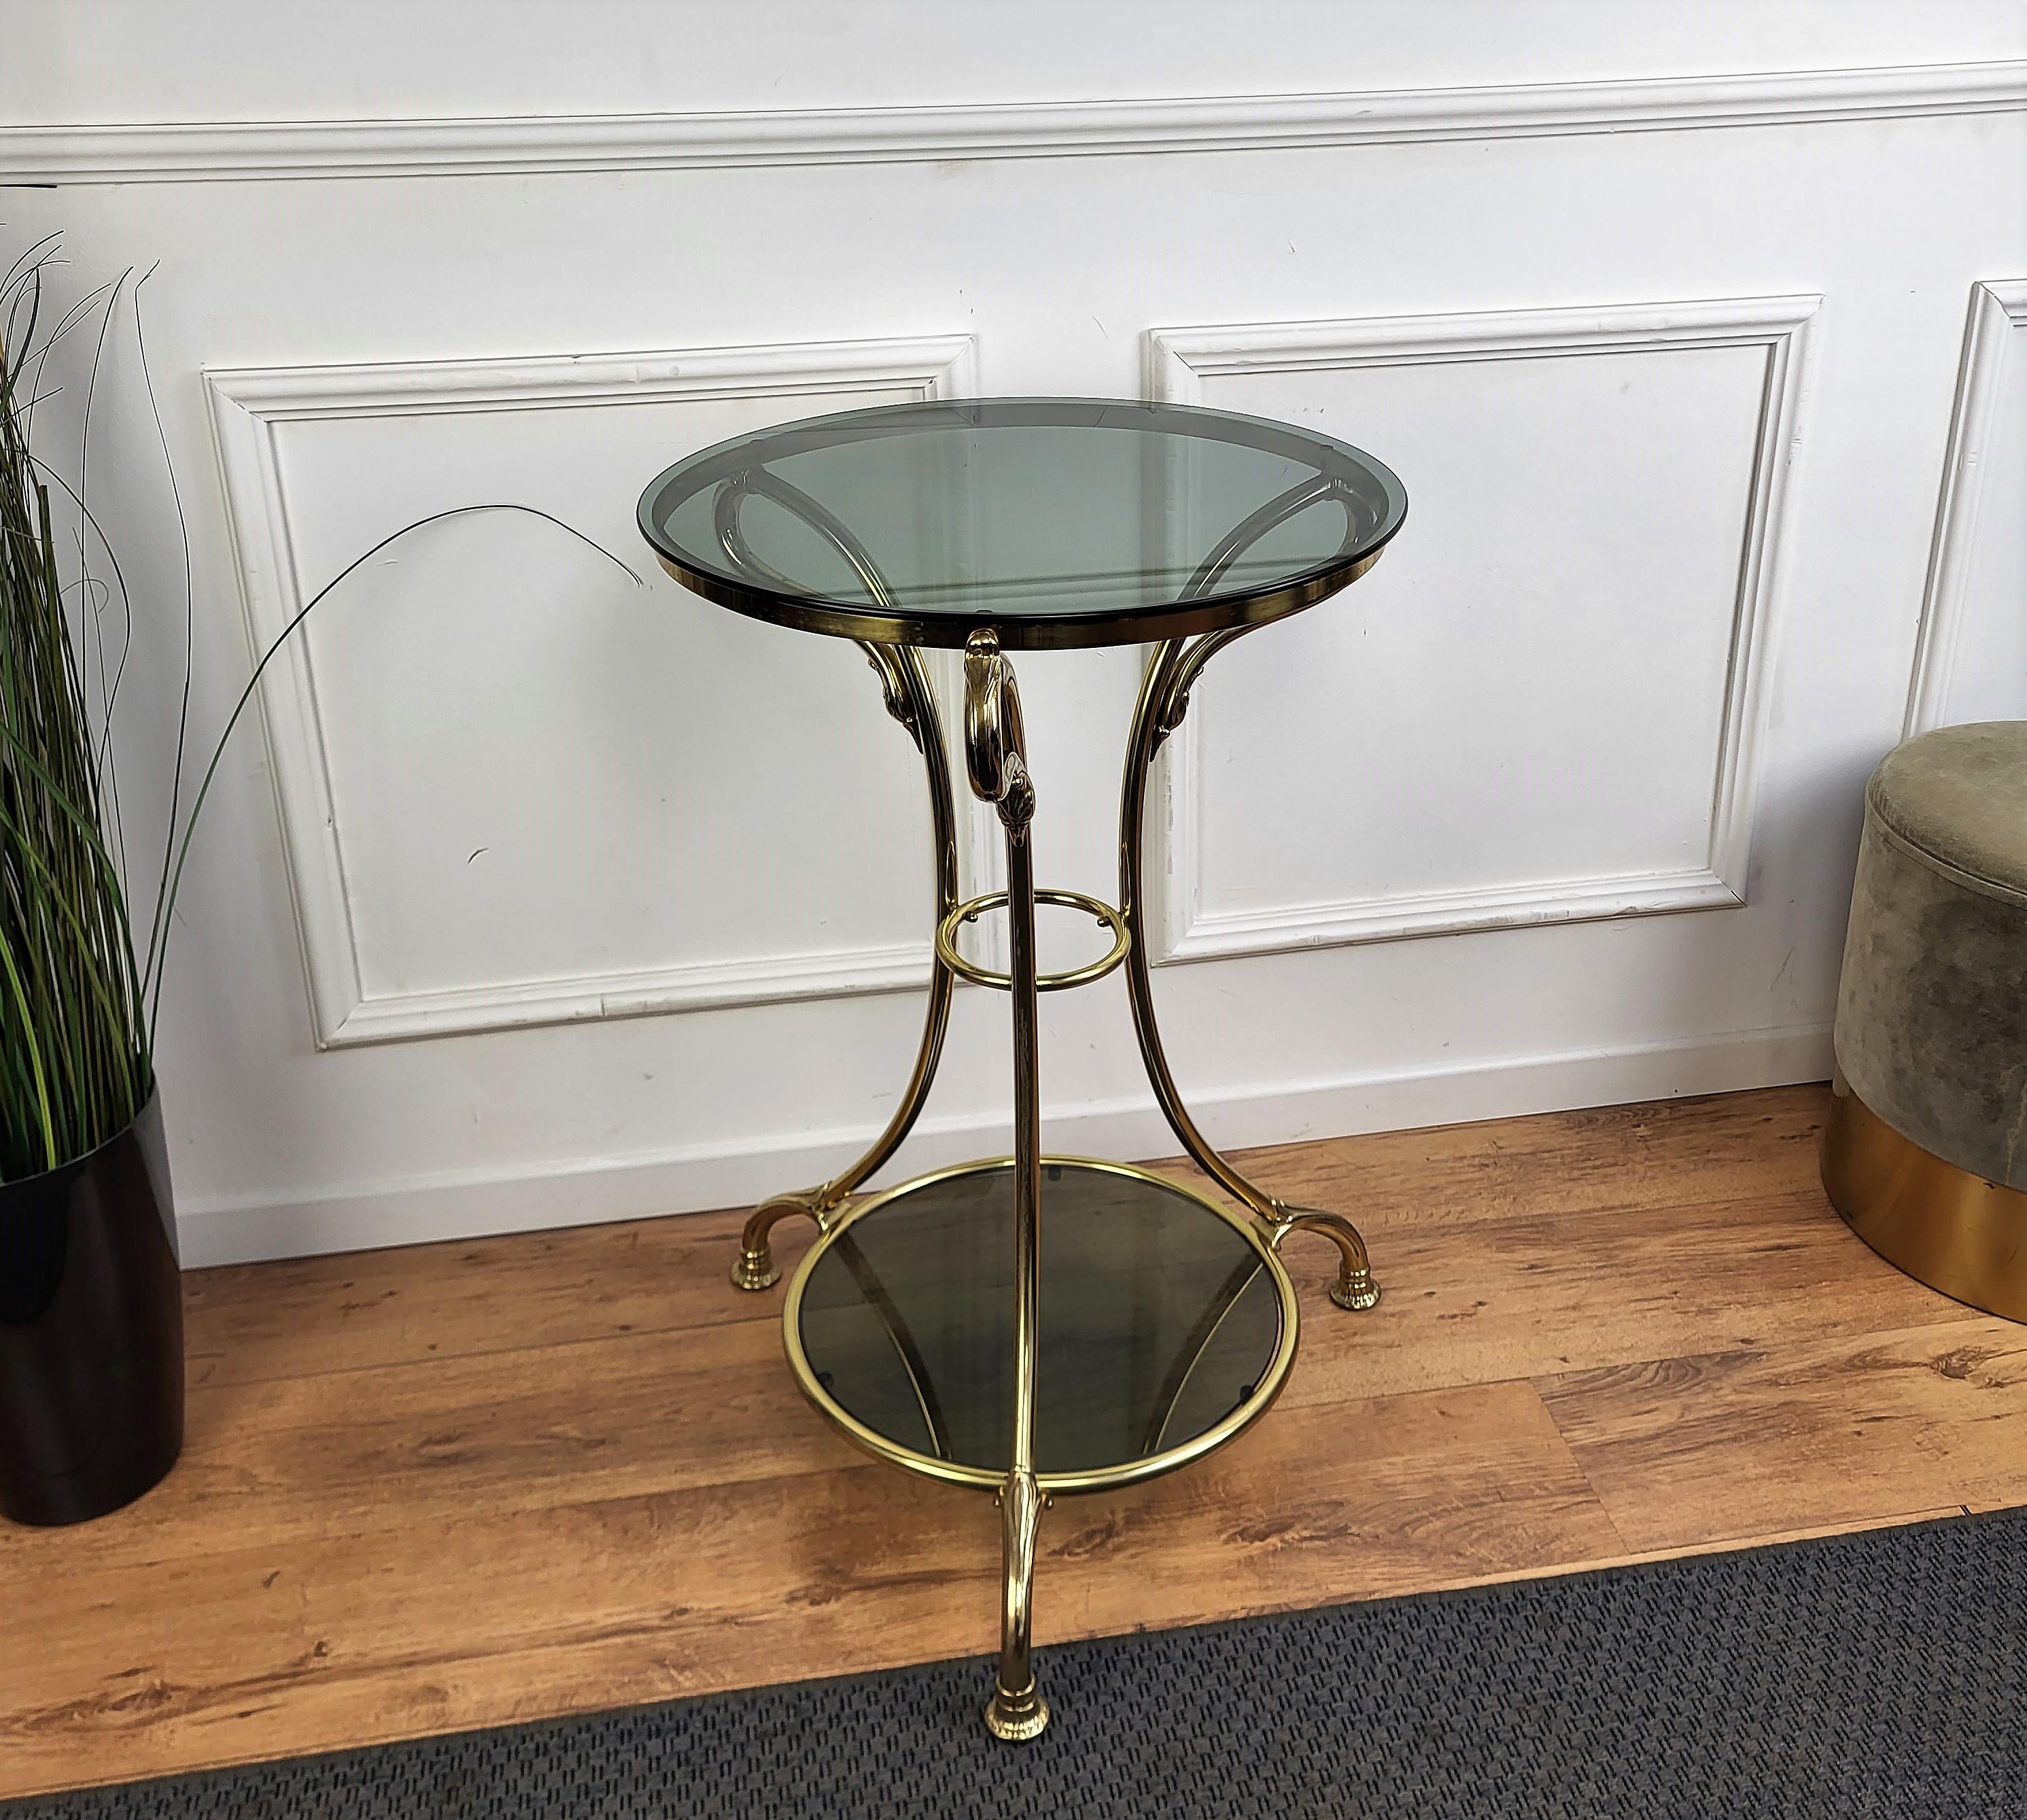 Beautiful and stylish vintage 1980s Italian brass and smoked glass gueridon side table or coffee table or sofa table. Very good condition with the main brass structure decorated and shaped with three swan heads and 2 round dark glasses. 
A great